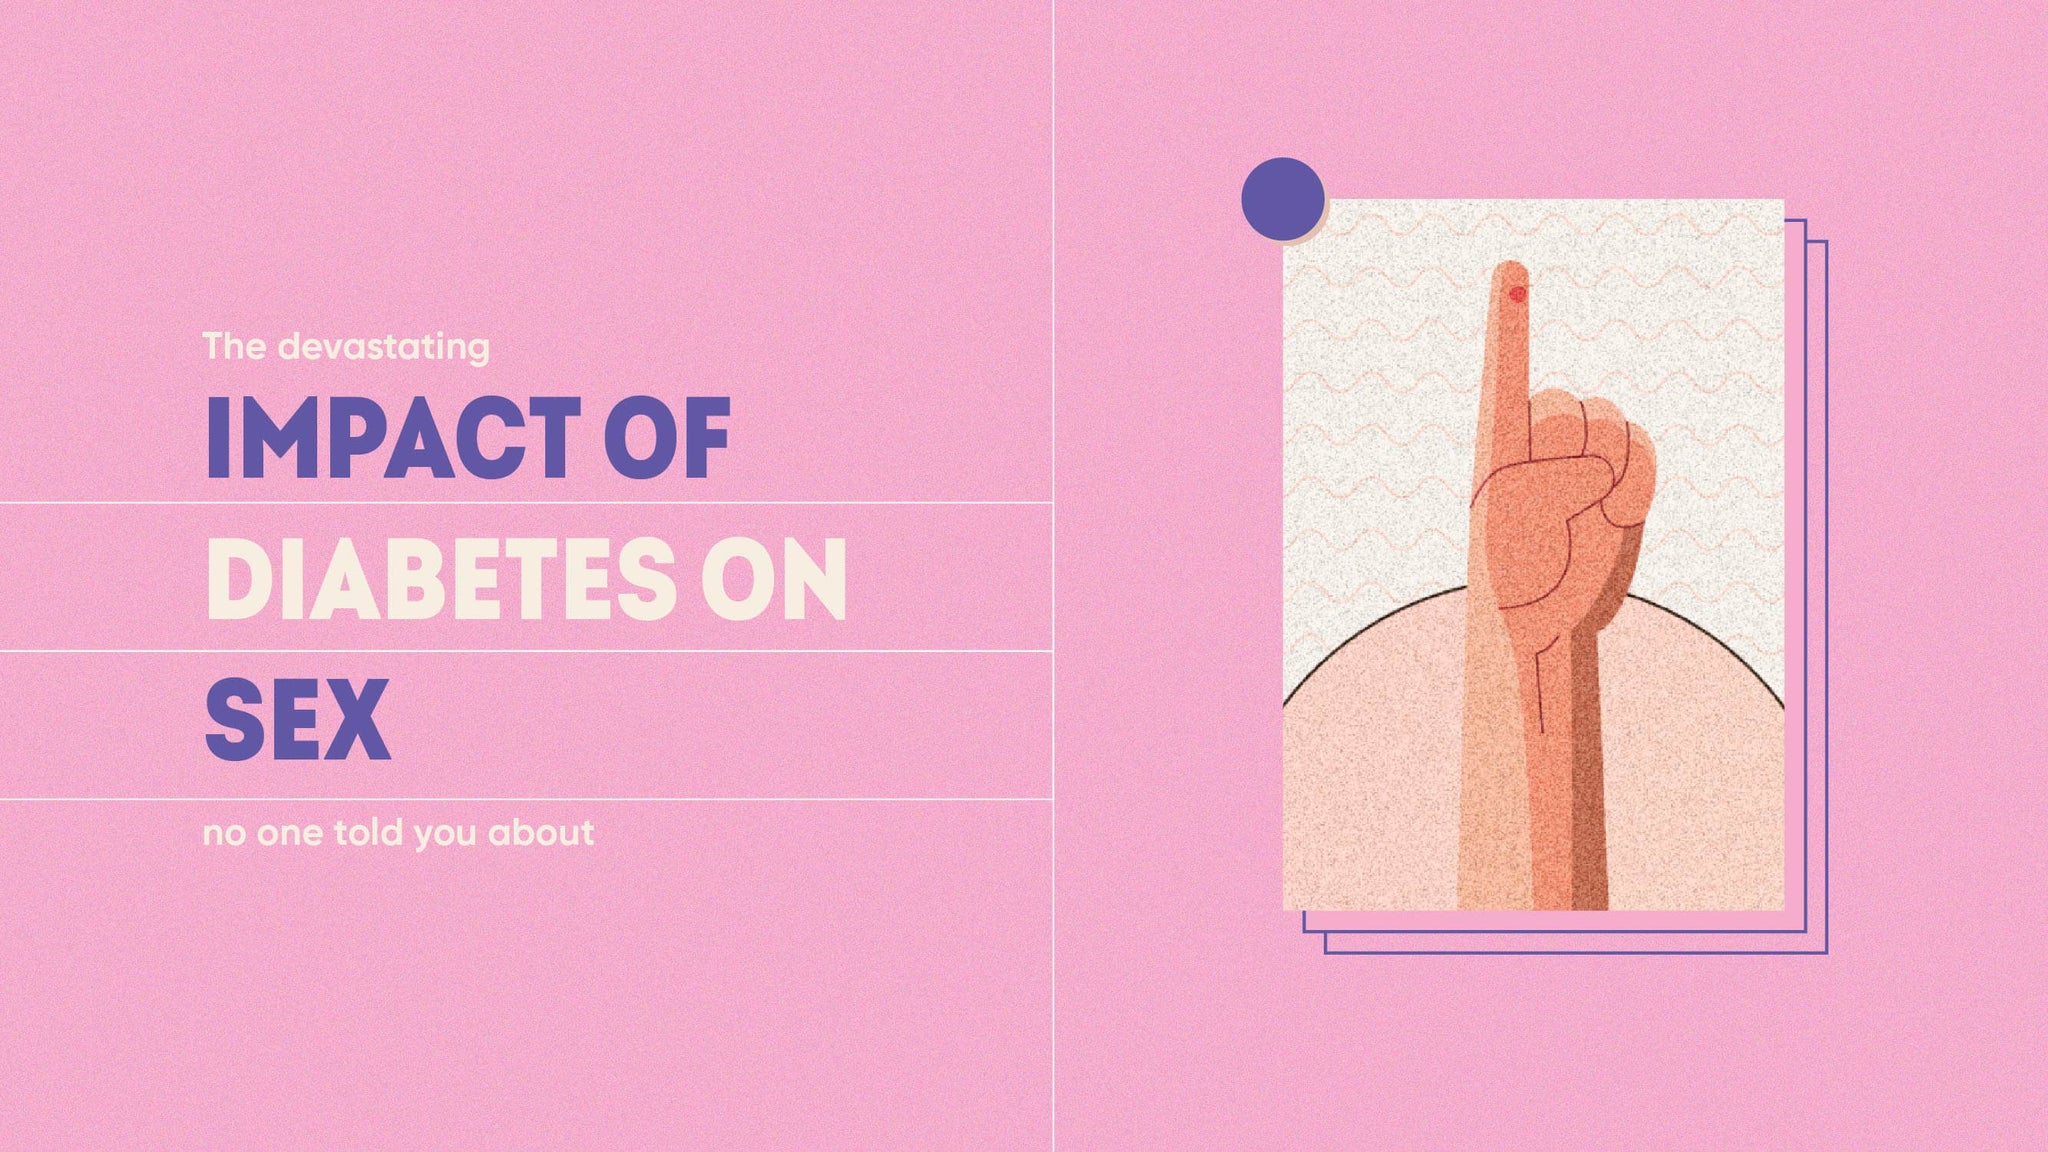 The devastating impact of Diabetes on sex no one told you about